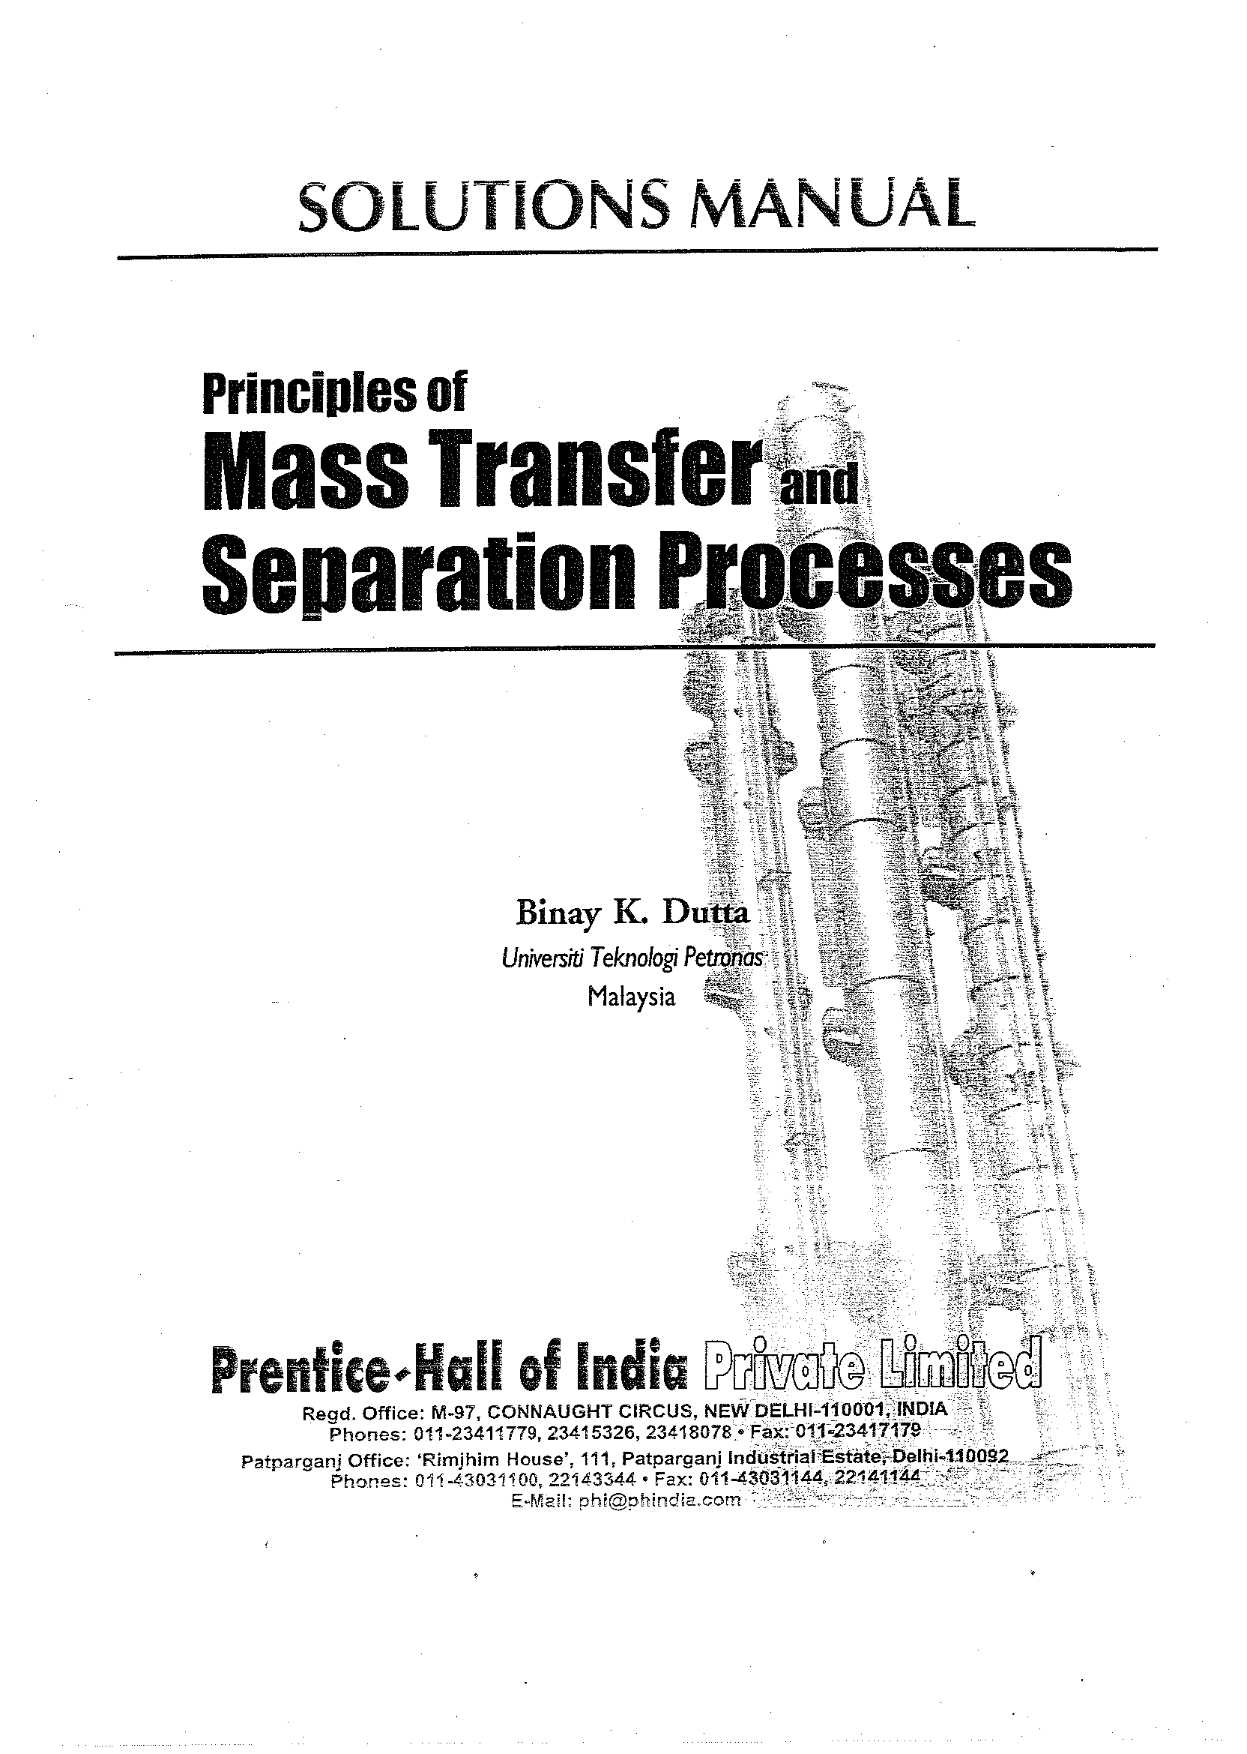 Download free principles of mass transfer and separation processes by Binay K. Dutta solution manual eBook pdf | solutions